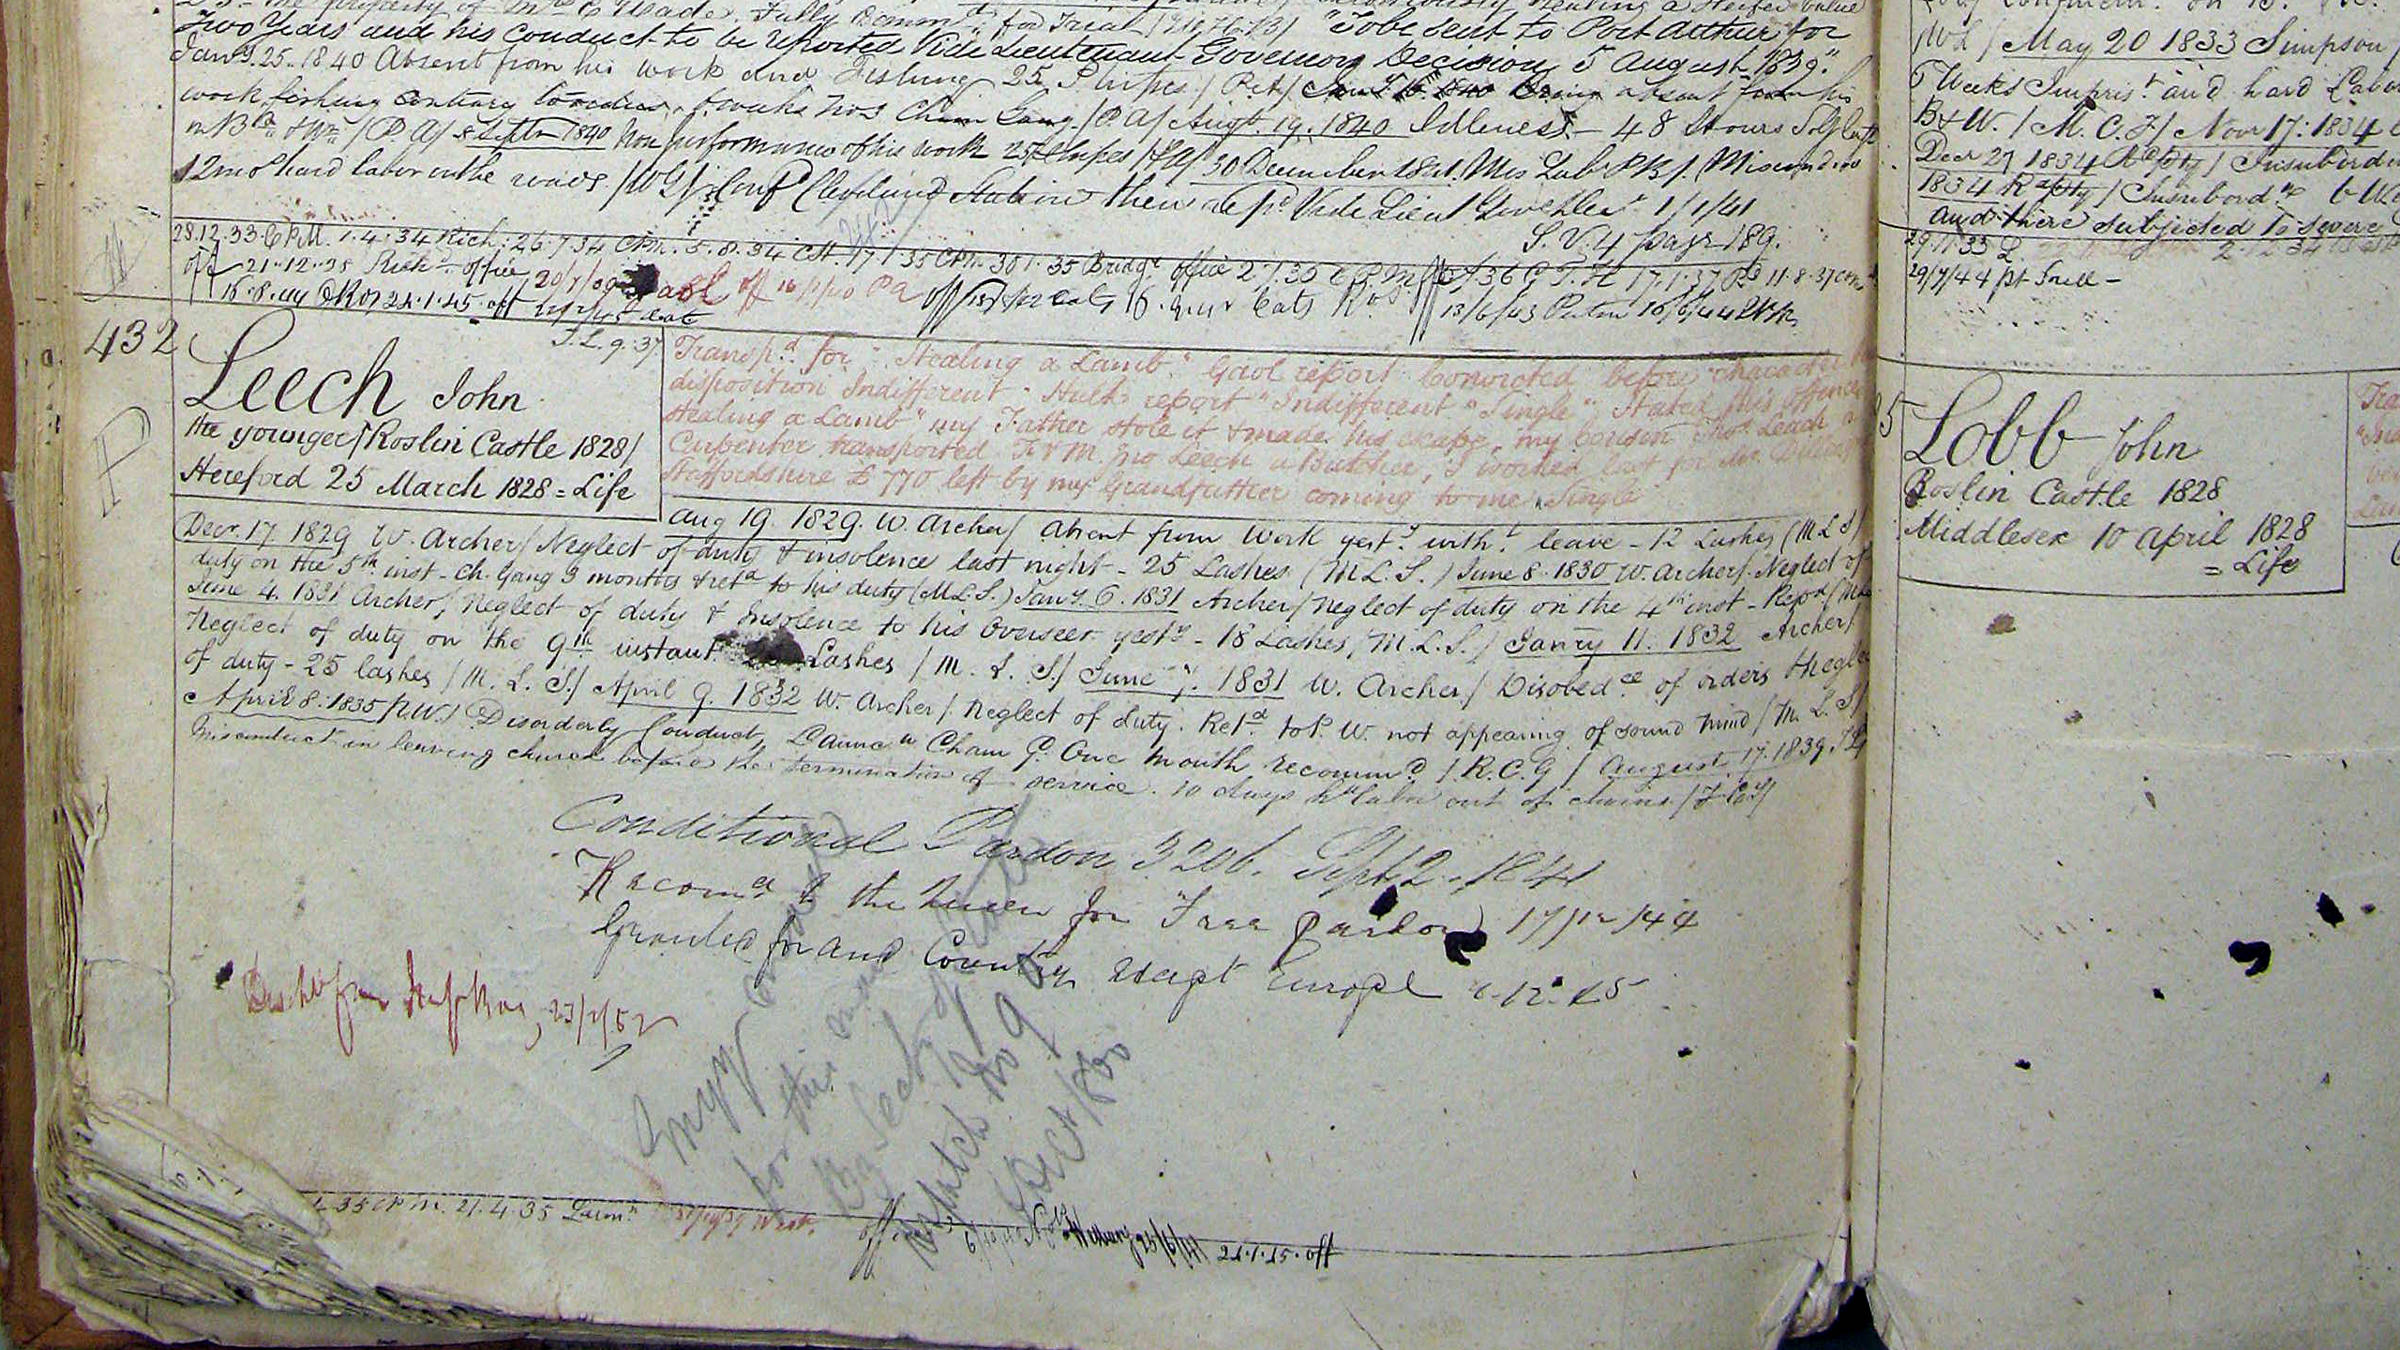 Excerpt from ledgers held as part of Brickendon Estate’s archives mentioning John Leech.